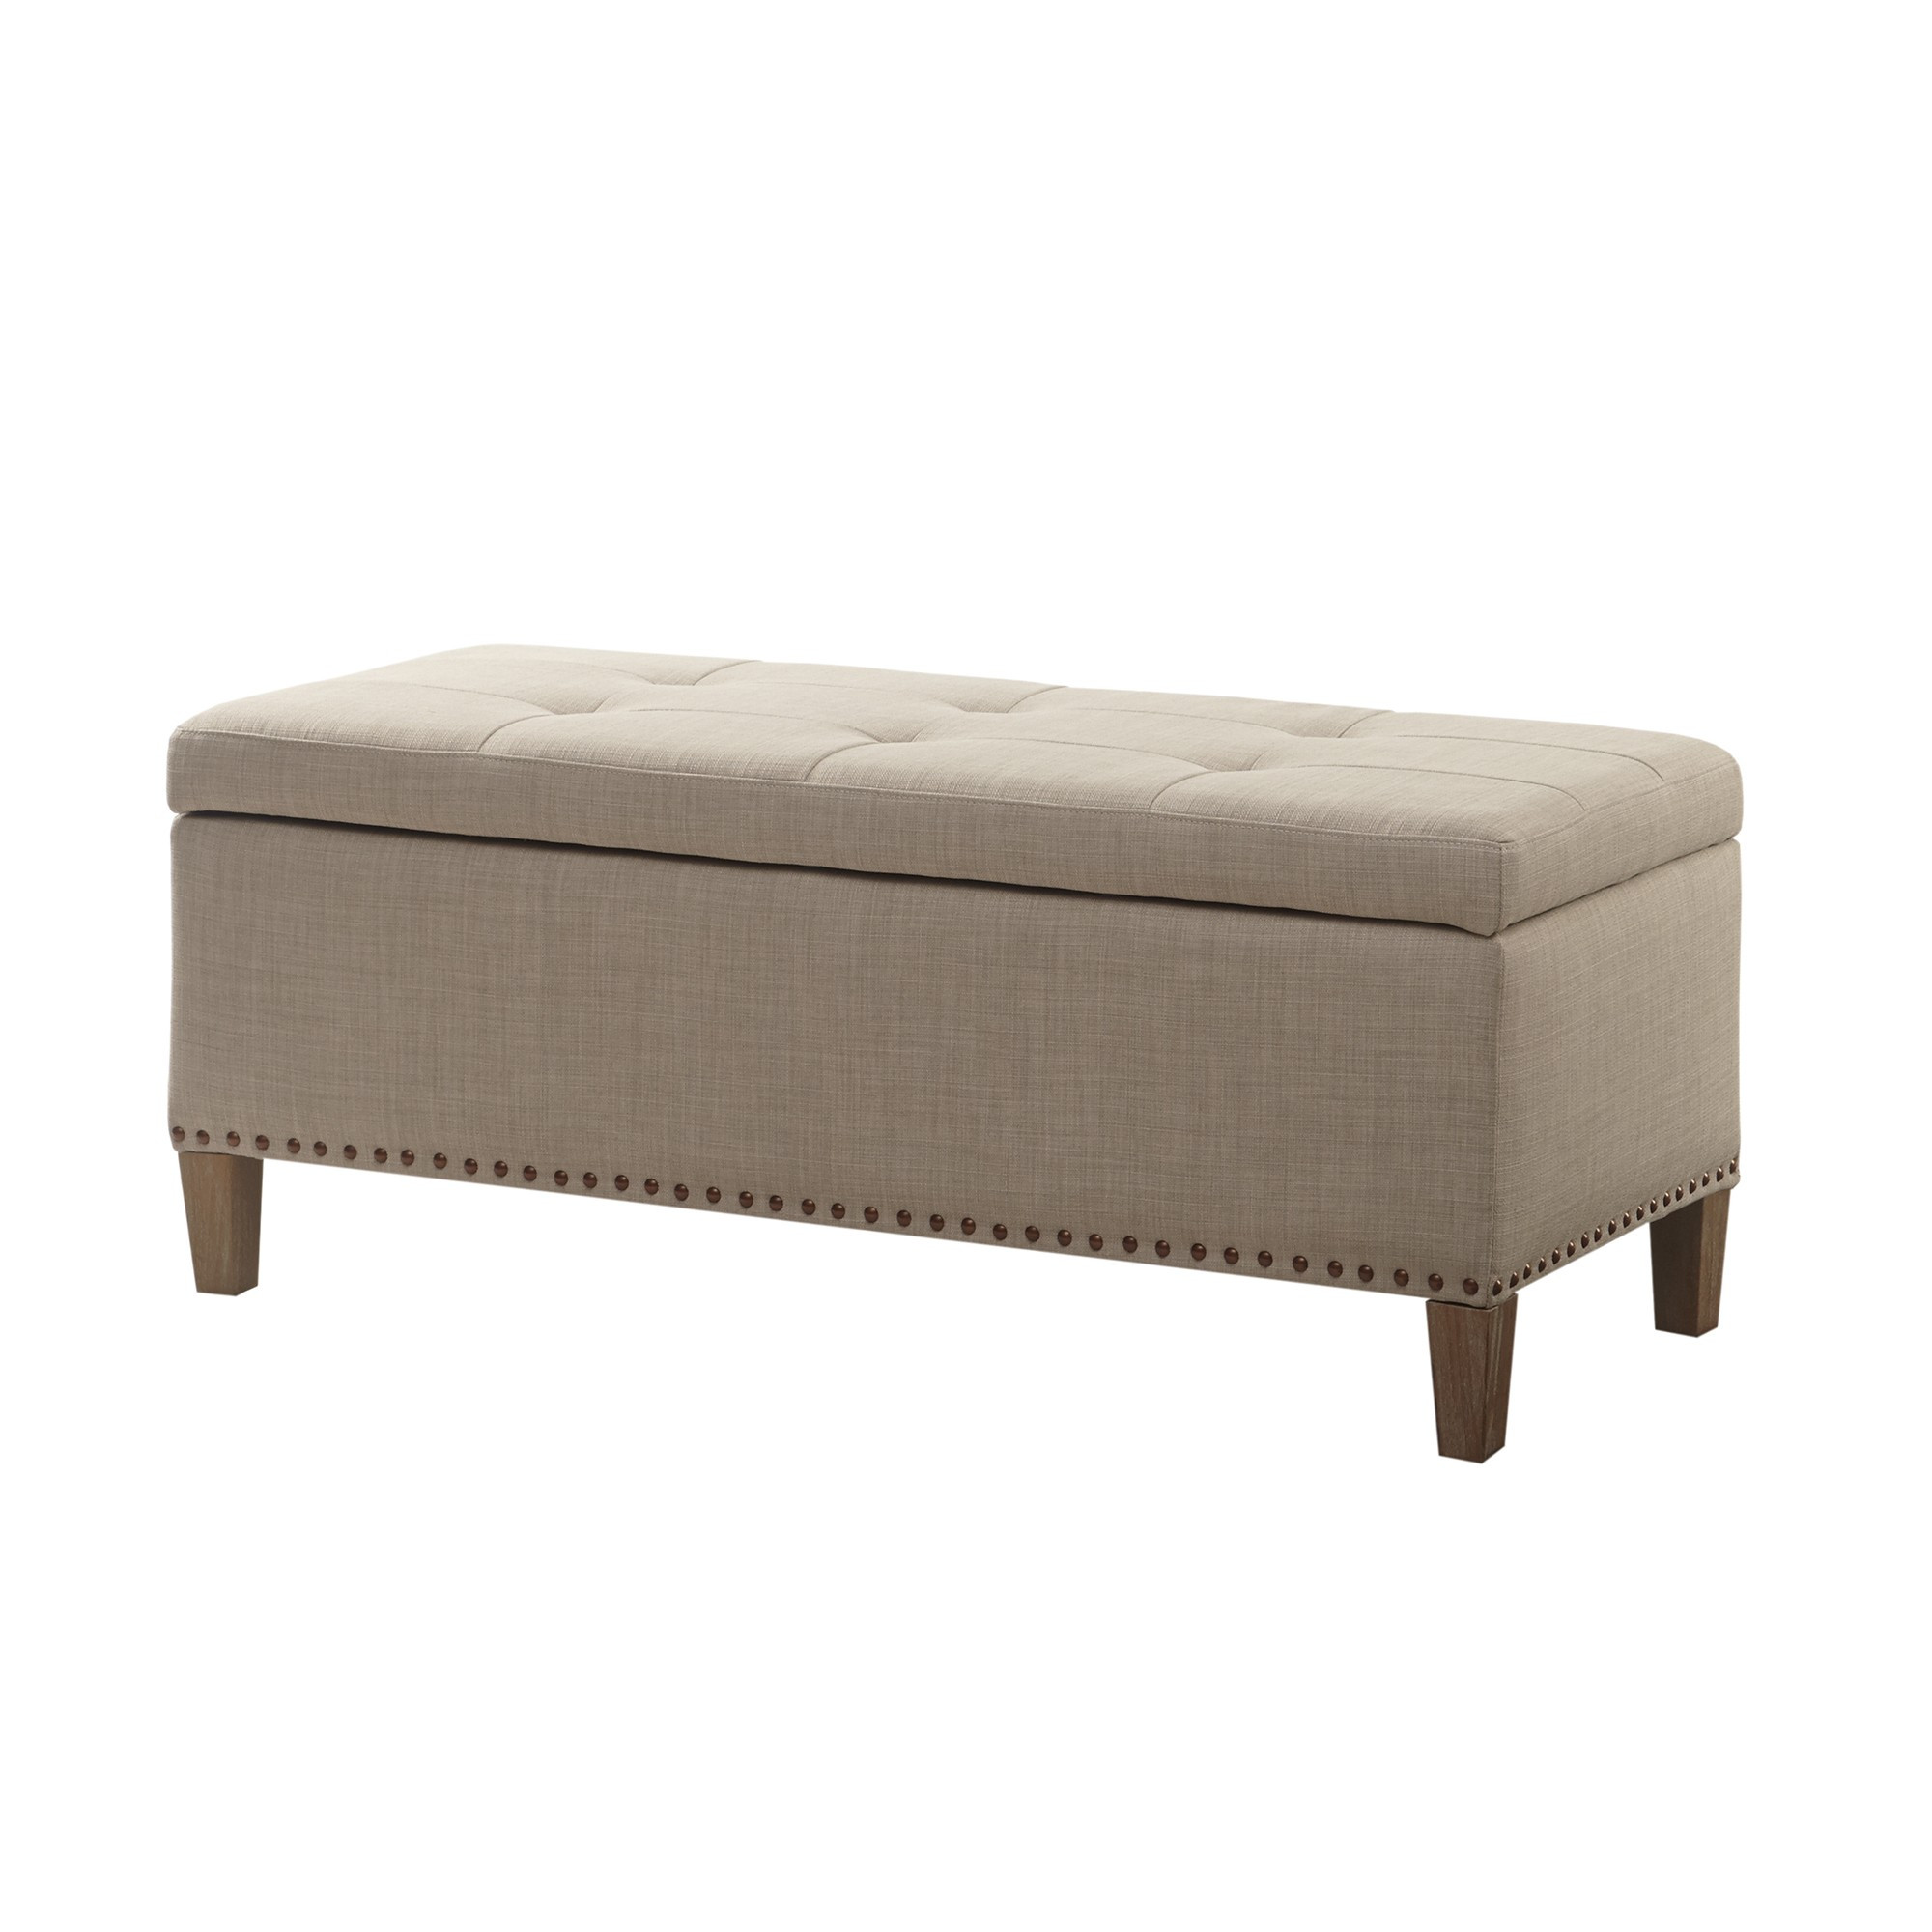 Tufted Storage Bench Target
 Tahlia Tufted Top Storage Bench Natural